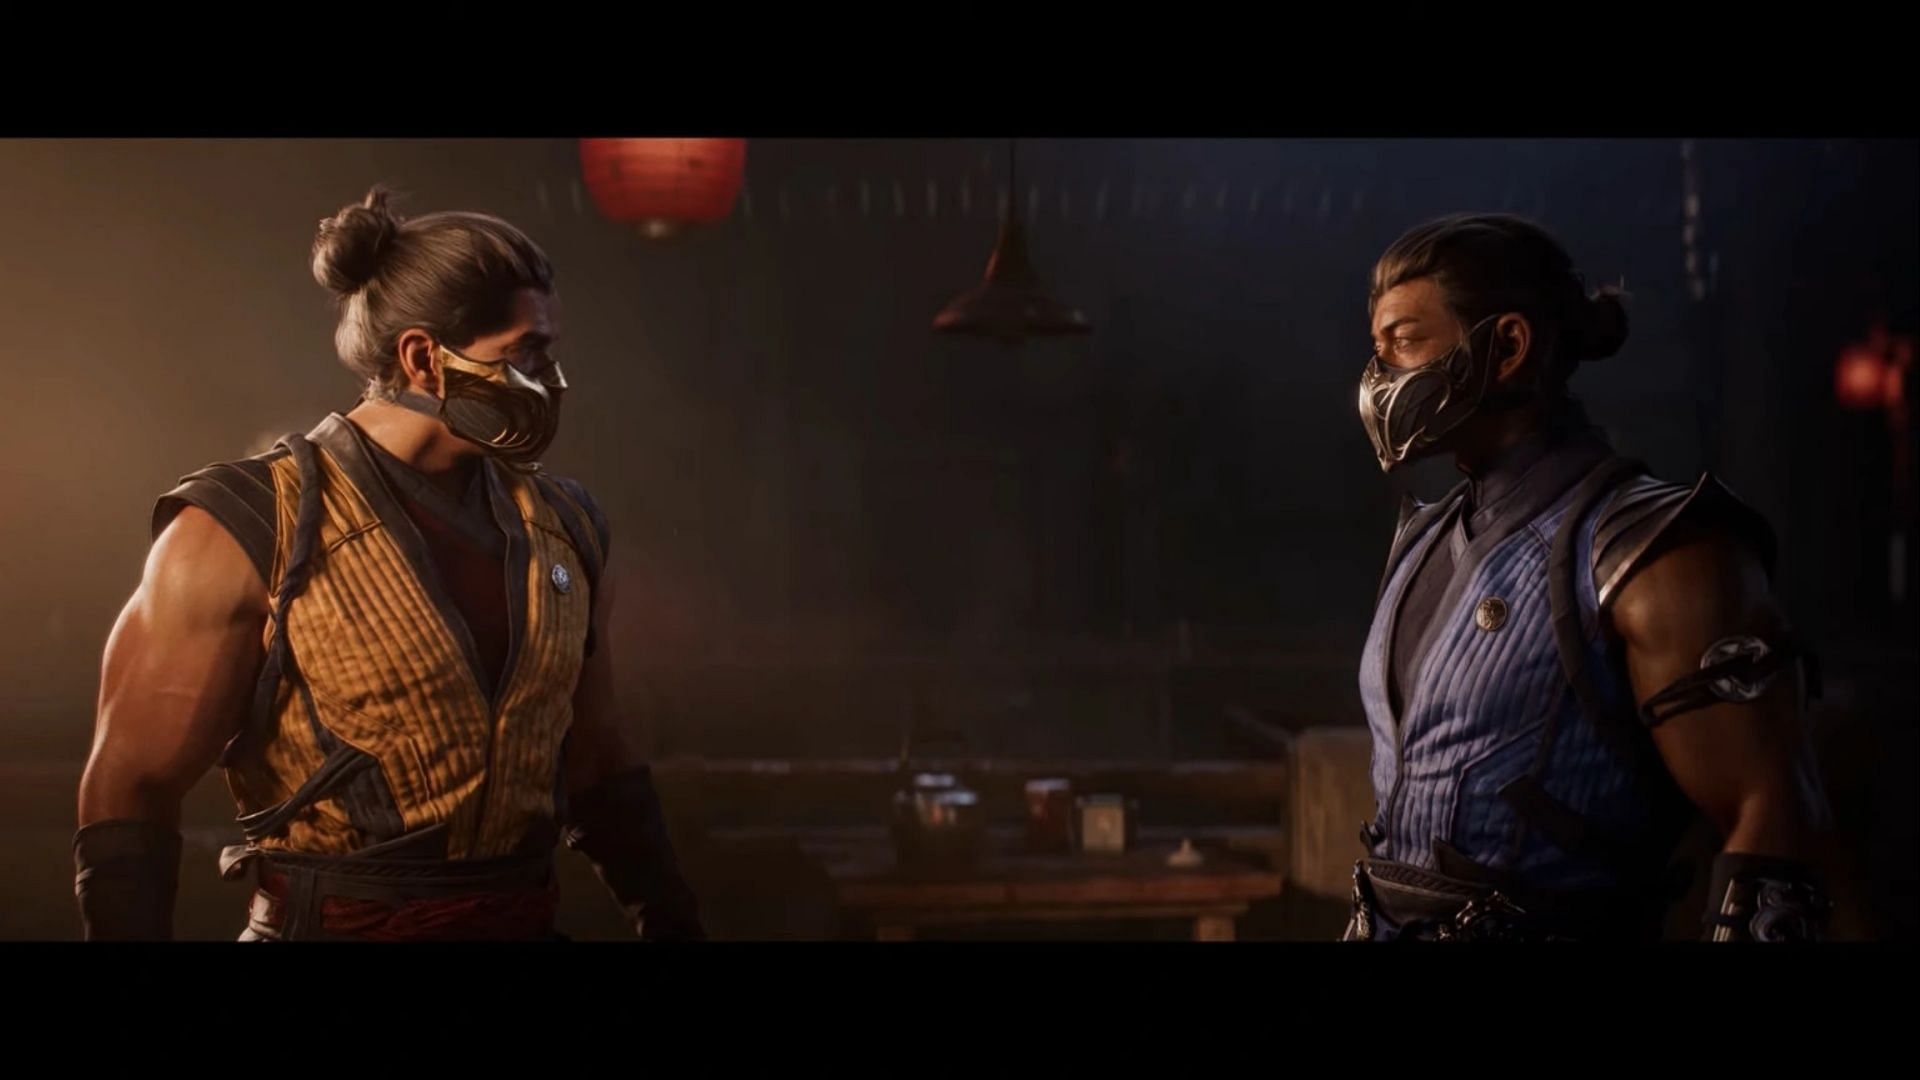 Mortal Kombat 1 DLC  Confirmed characters and story expansion